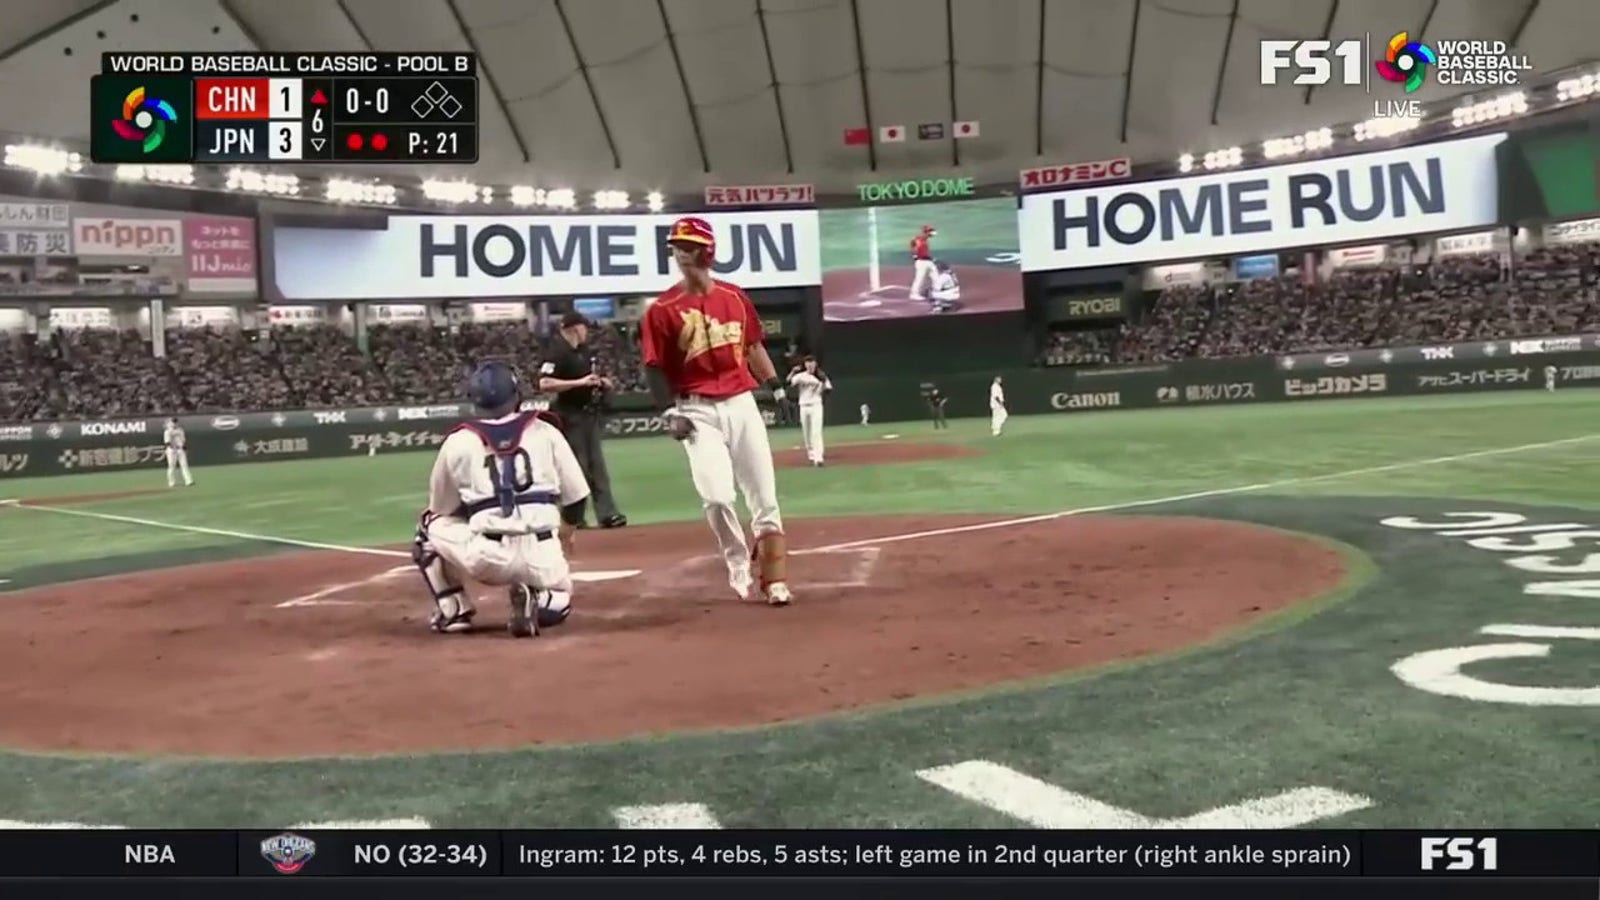 Pei Liang cranks a solo home run to get China on the board against Japan, 3-1